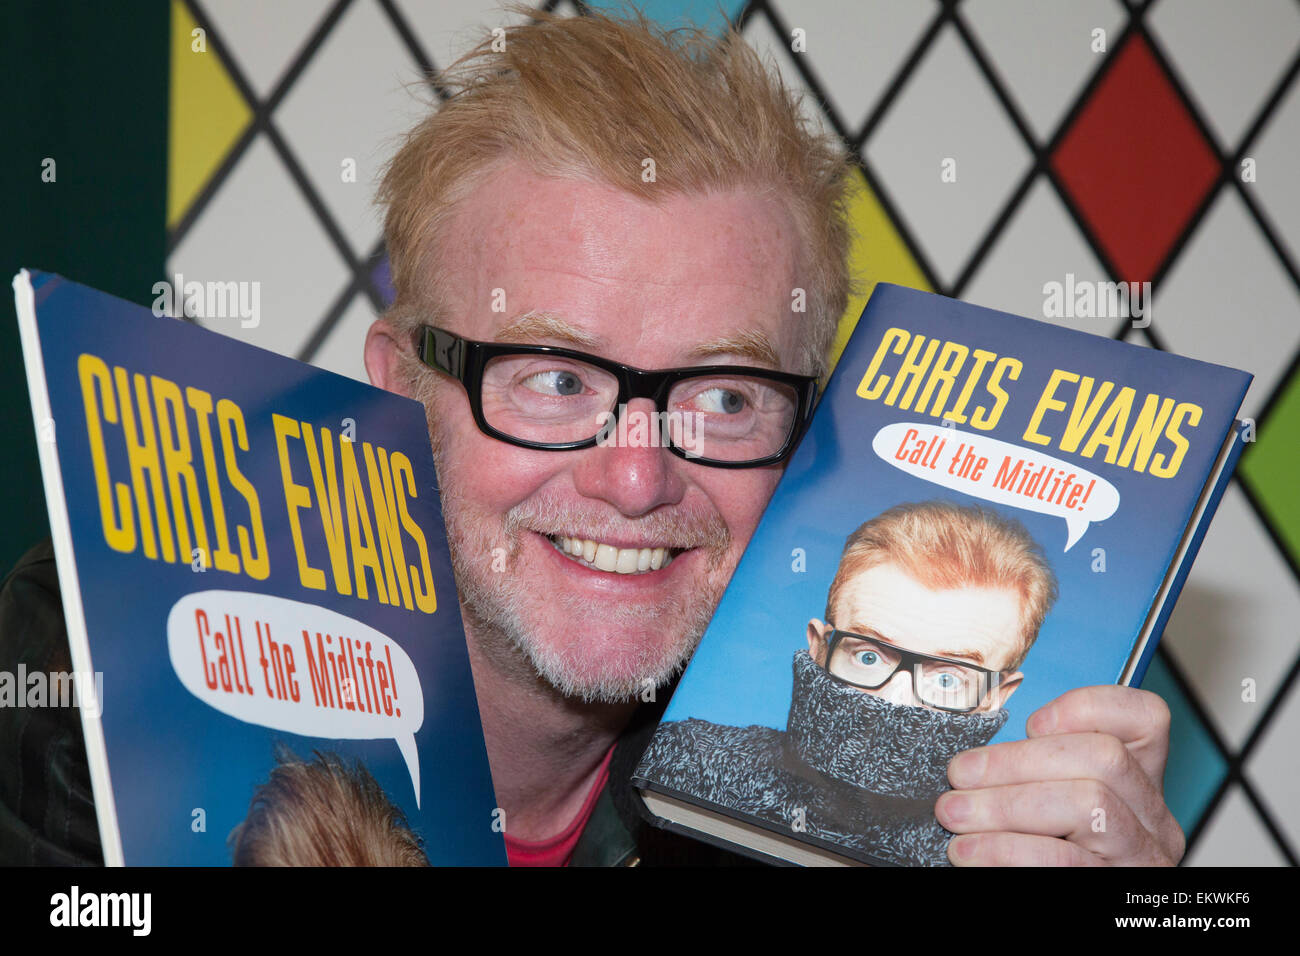 London, UK. 14 April 2015. Chris Evans opens The Club at The Ivy and introduces his new book "Call the Midlife".  The London Book Fair 2015 opens at Olympia and runs until 16 April 2015. Credit:  Nick Savage/Alamy Live News Stock Photo